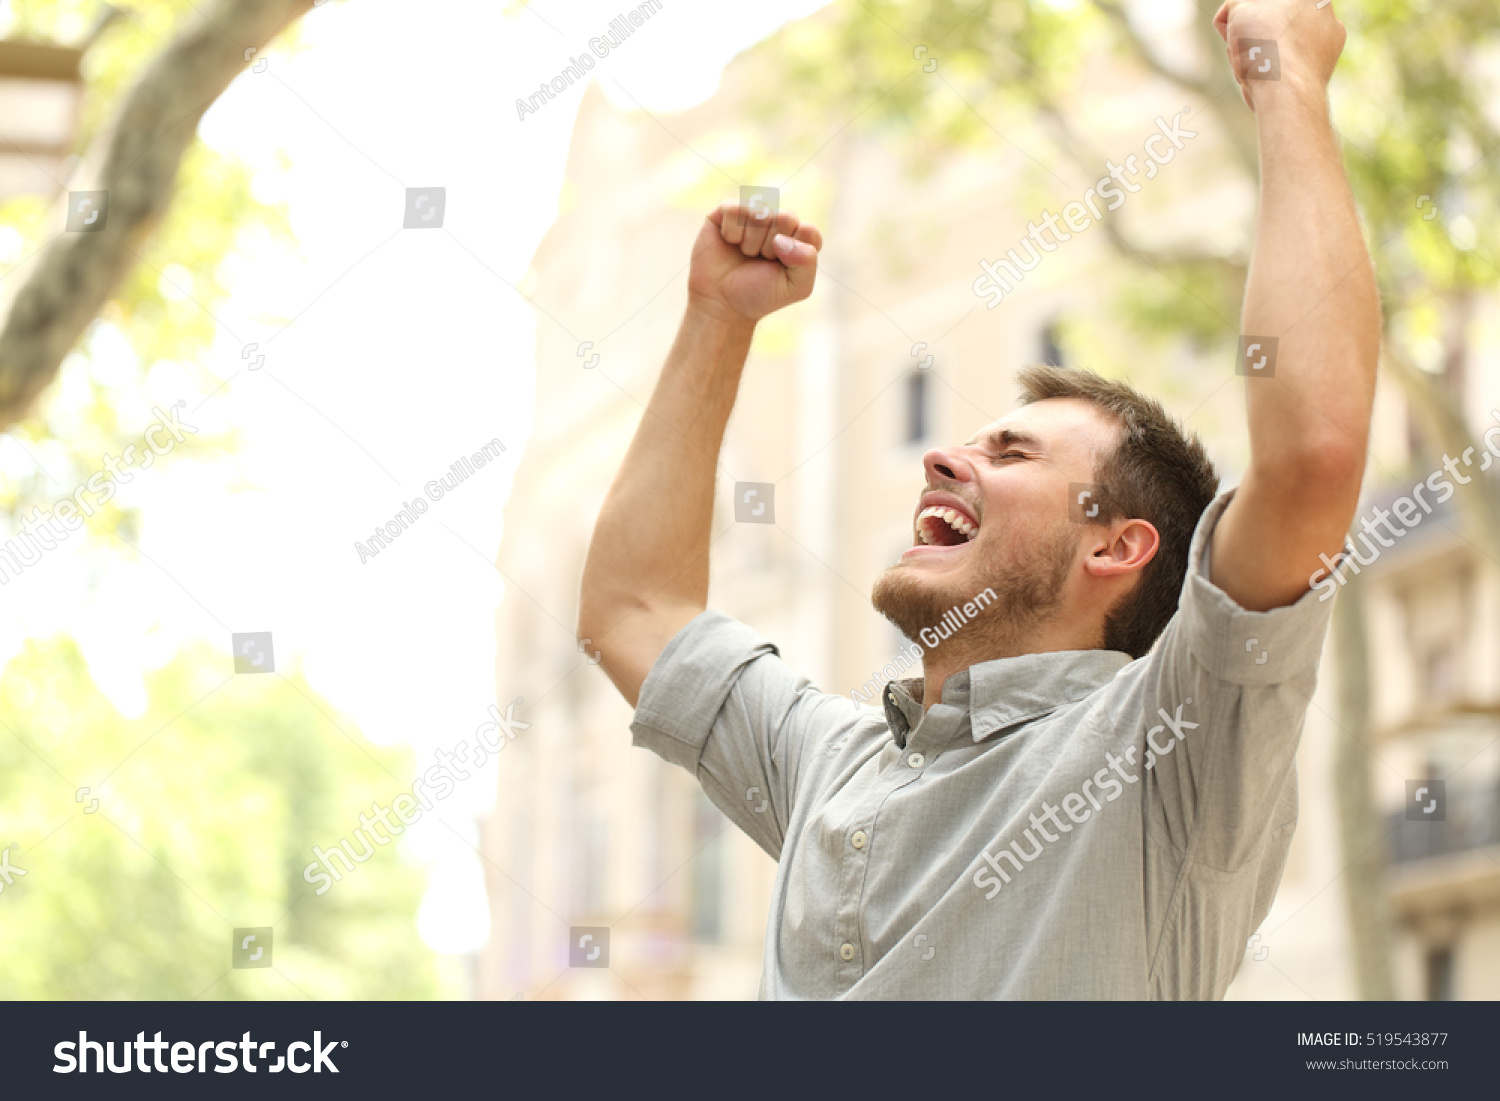 Portrait of an excited man raising arms in the street with buildings in the background #519543877